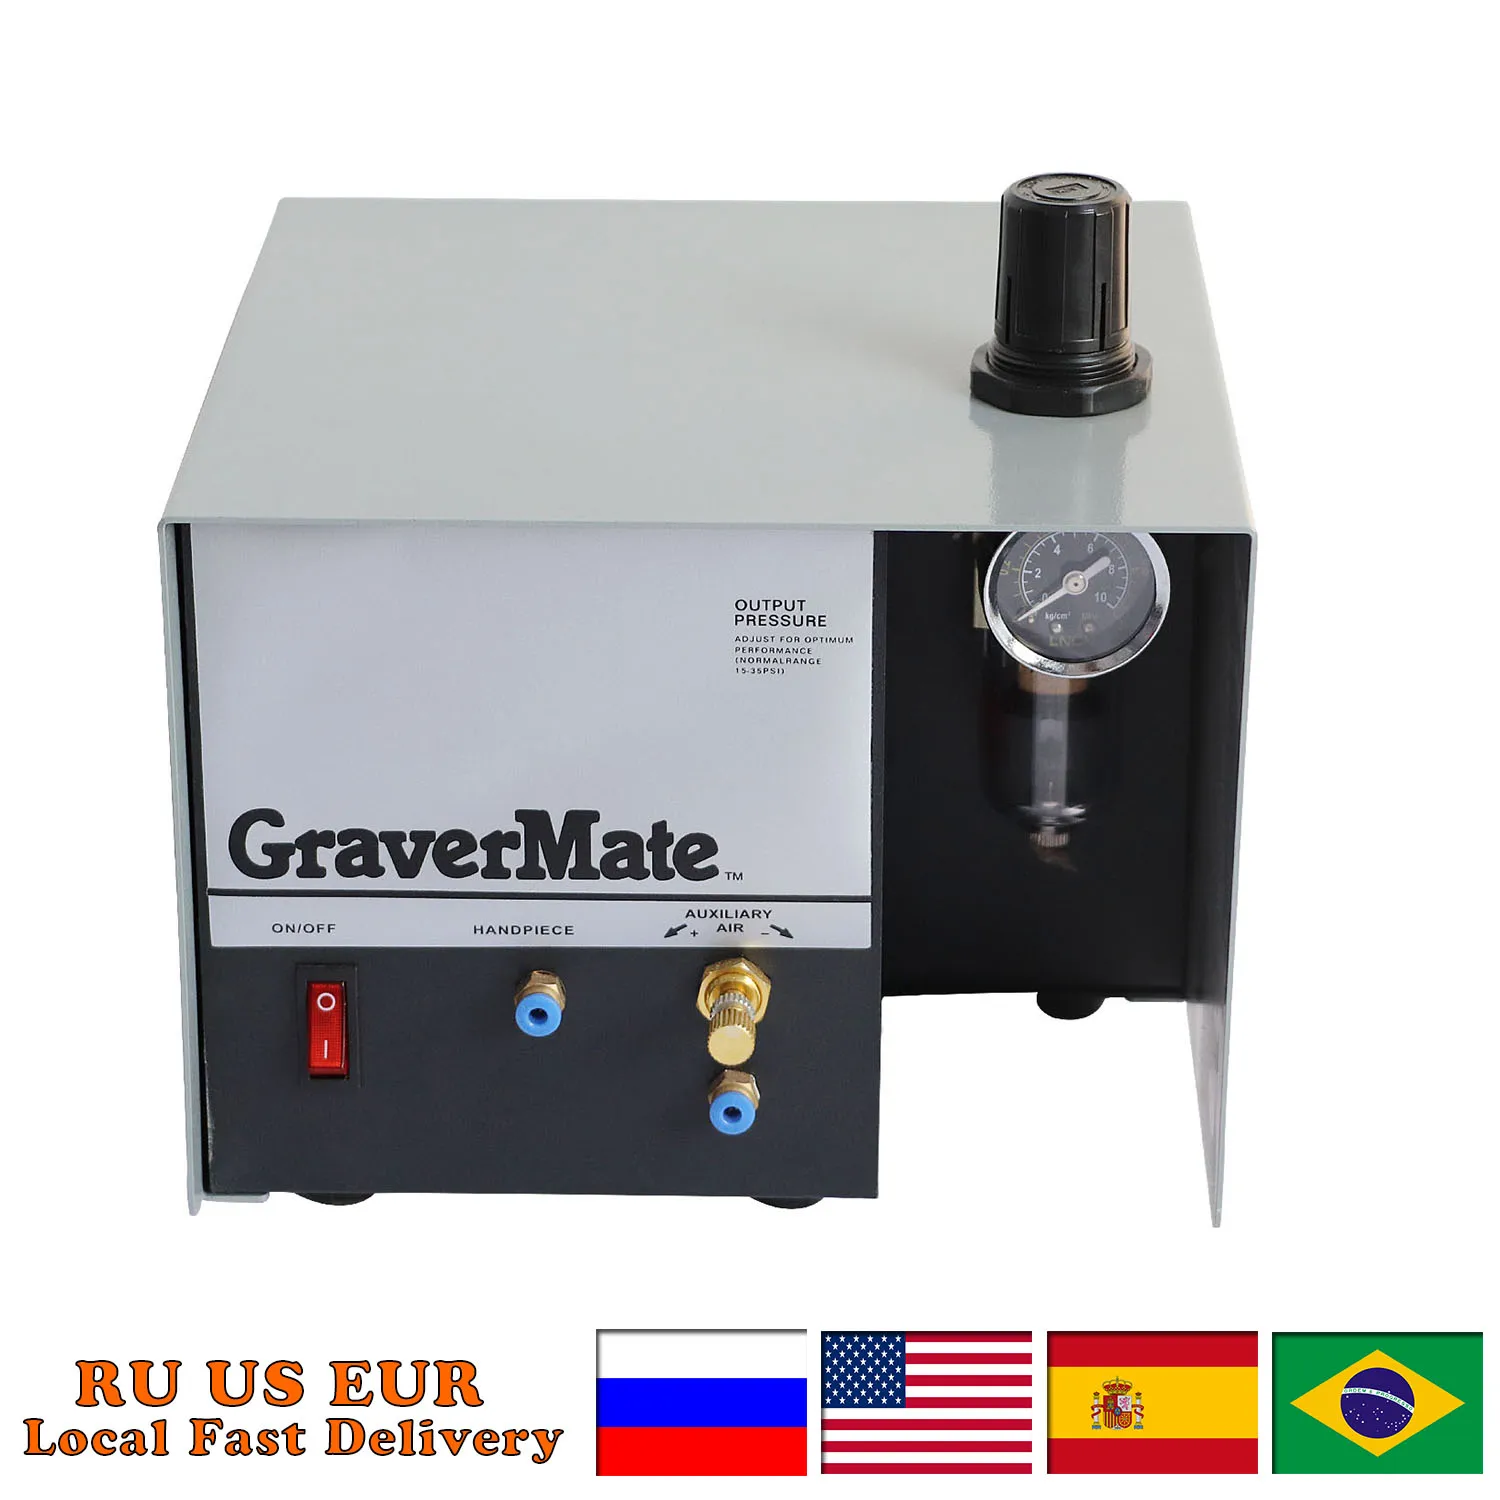 Pneumatic Engraving Machine - 1400 Rpm Adjustable Speed Micro-Setting Machine Pneumatic Foot-Operated Power Tools Jewelry Equipm